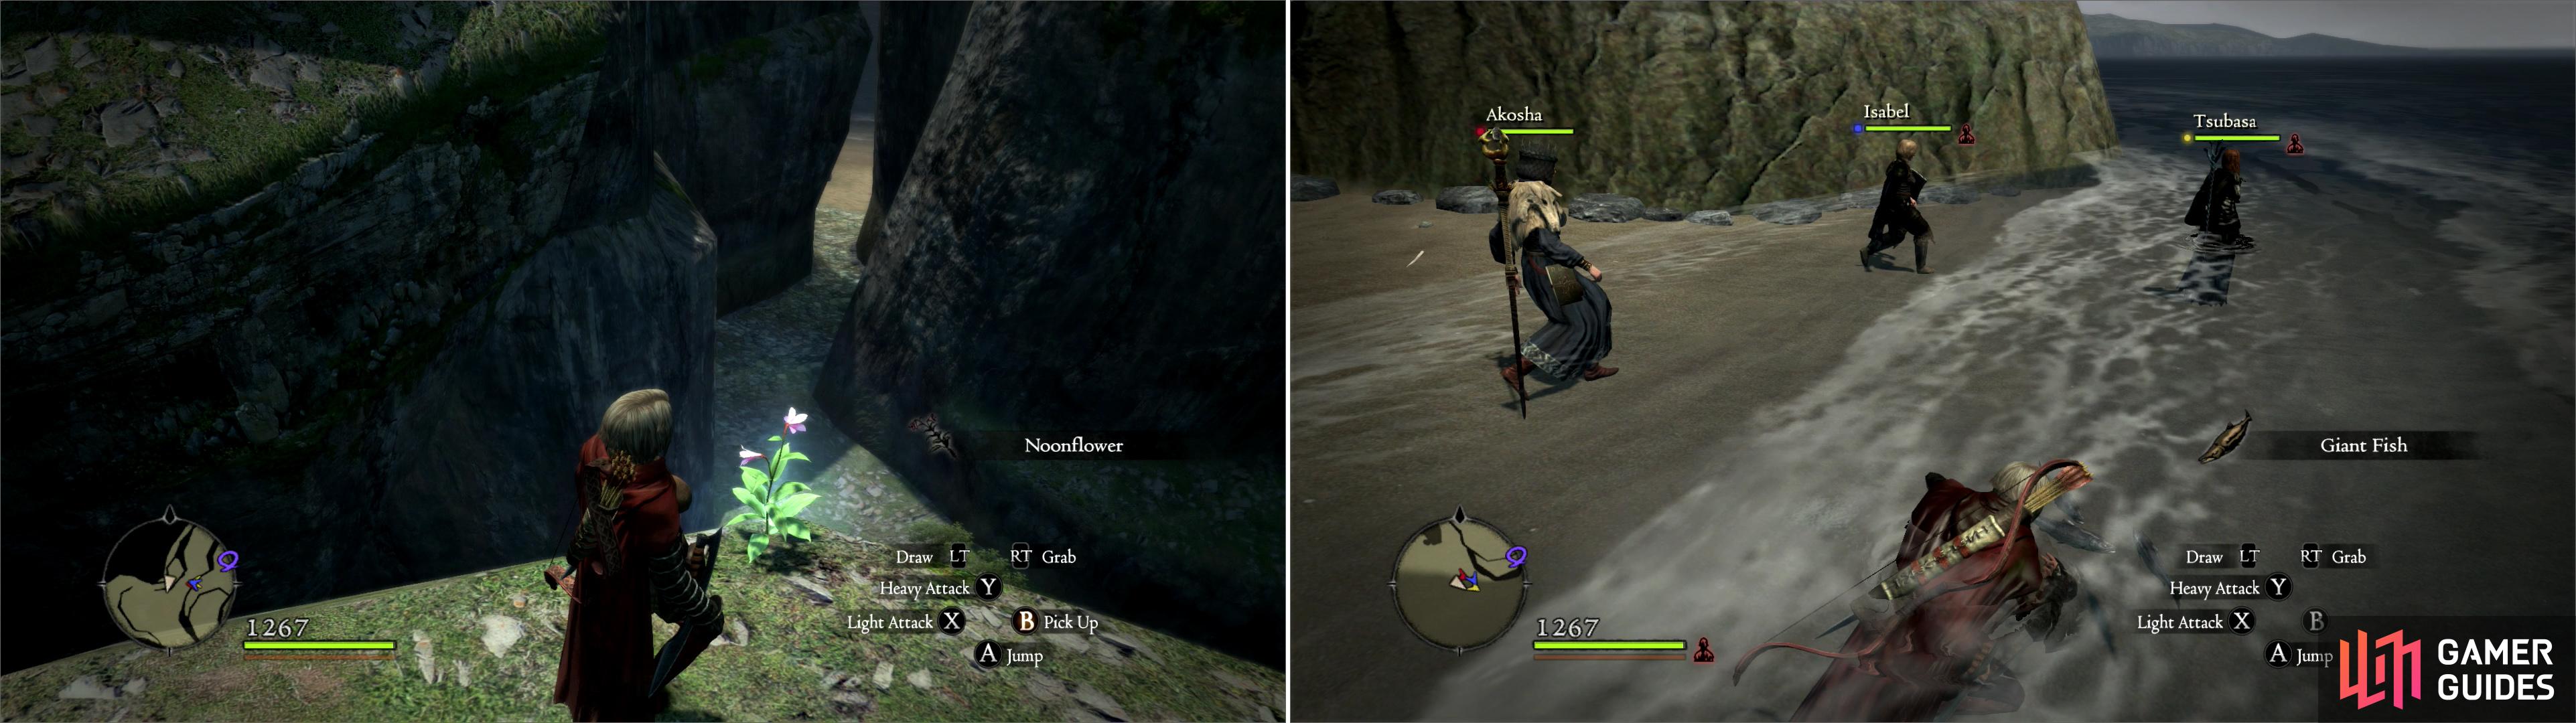 With some careful jumping you can obtain the very rare Noonflower (left). The fishing spots along Bloodwater Beach can yield Giant Fish (right).